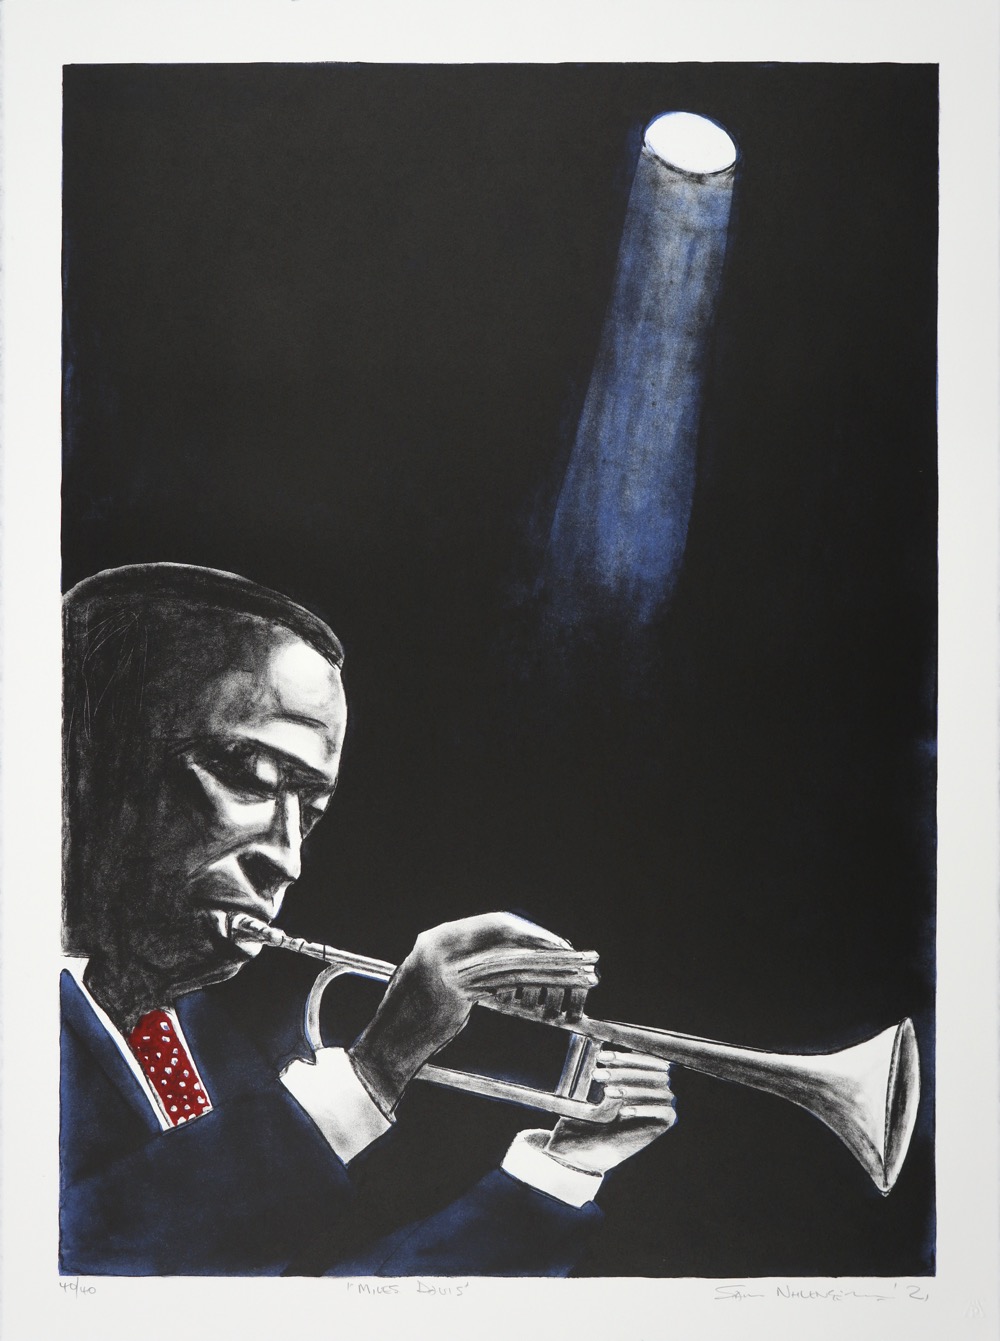 Miles Davis head and shoulders from the side playing the trumpet beneath a single spot light.